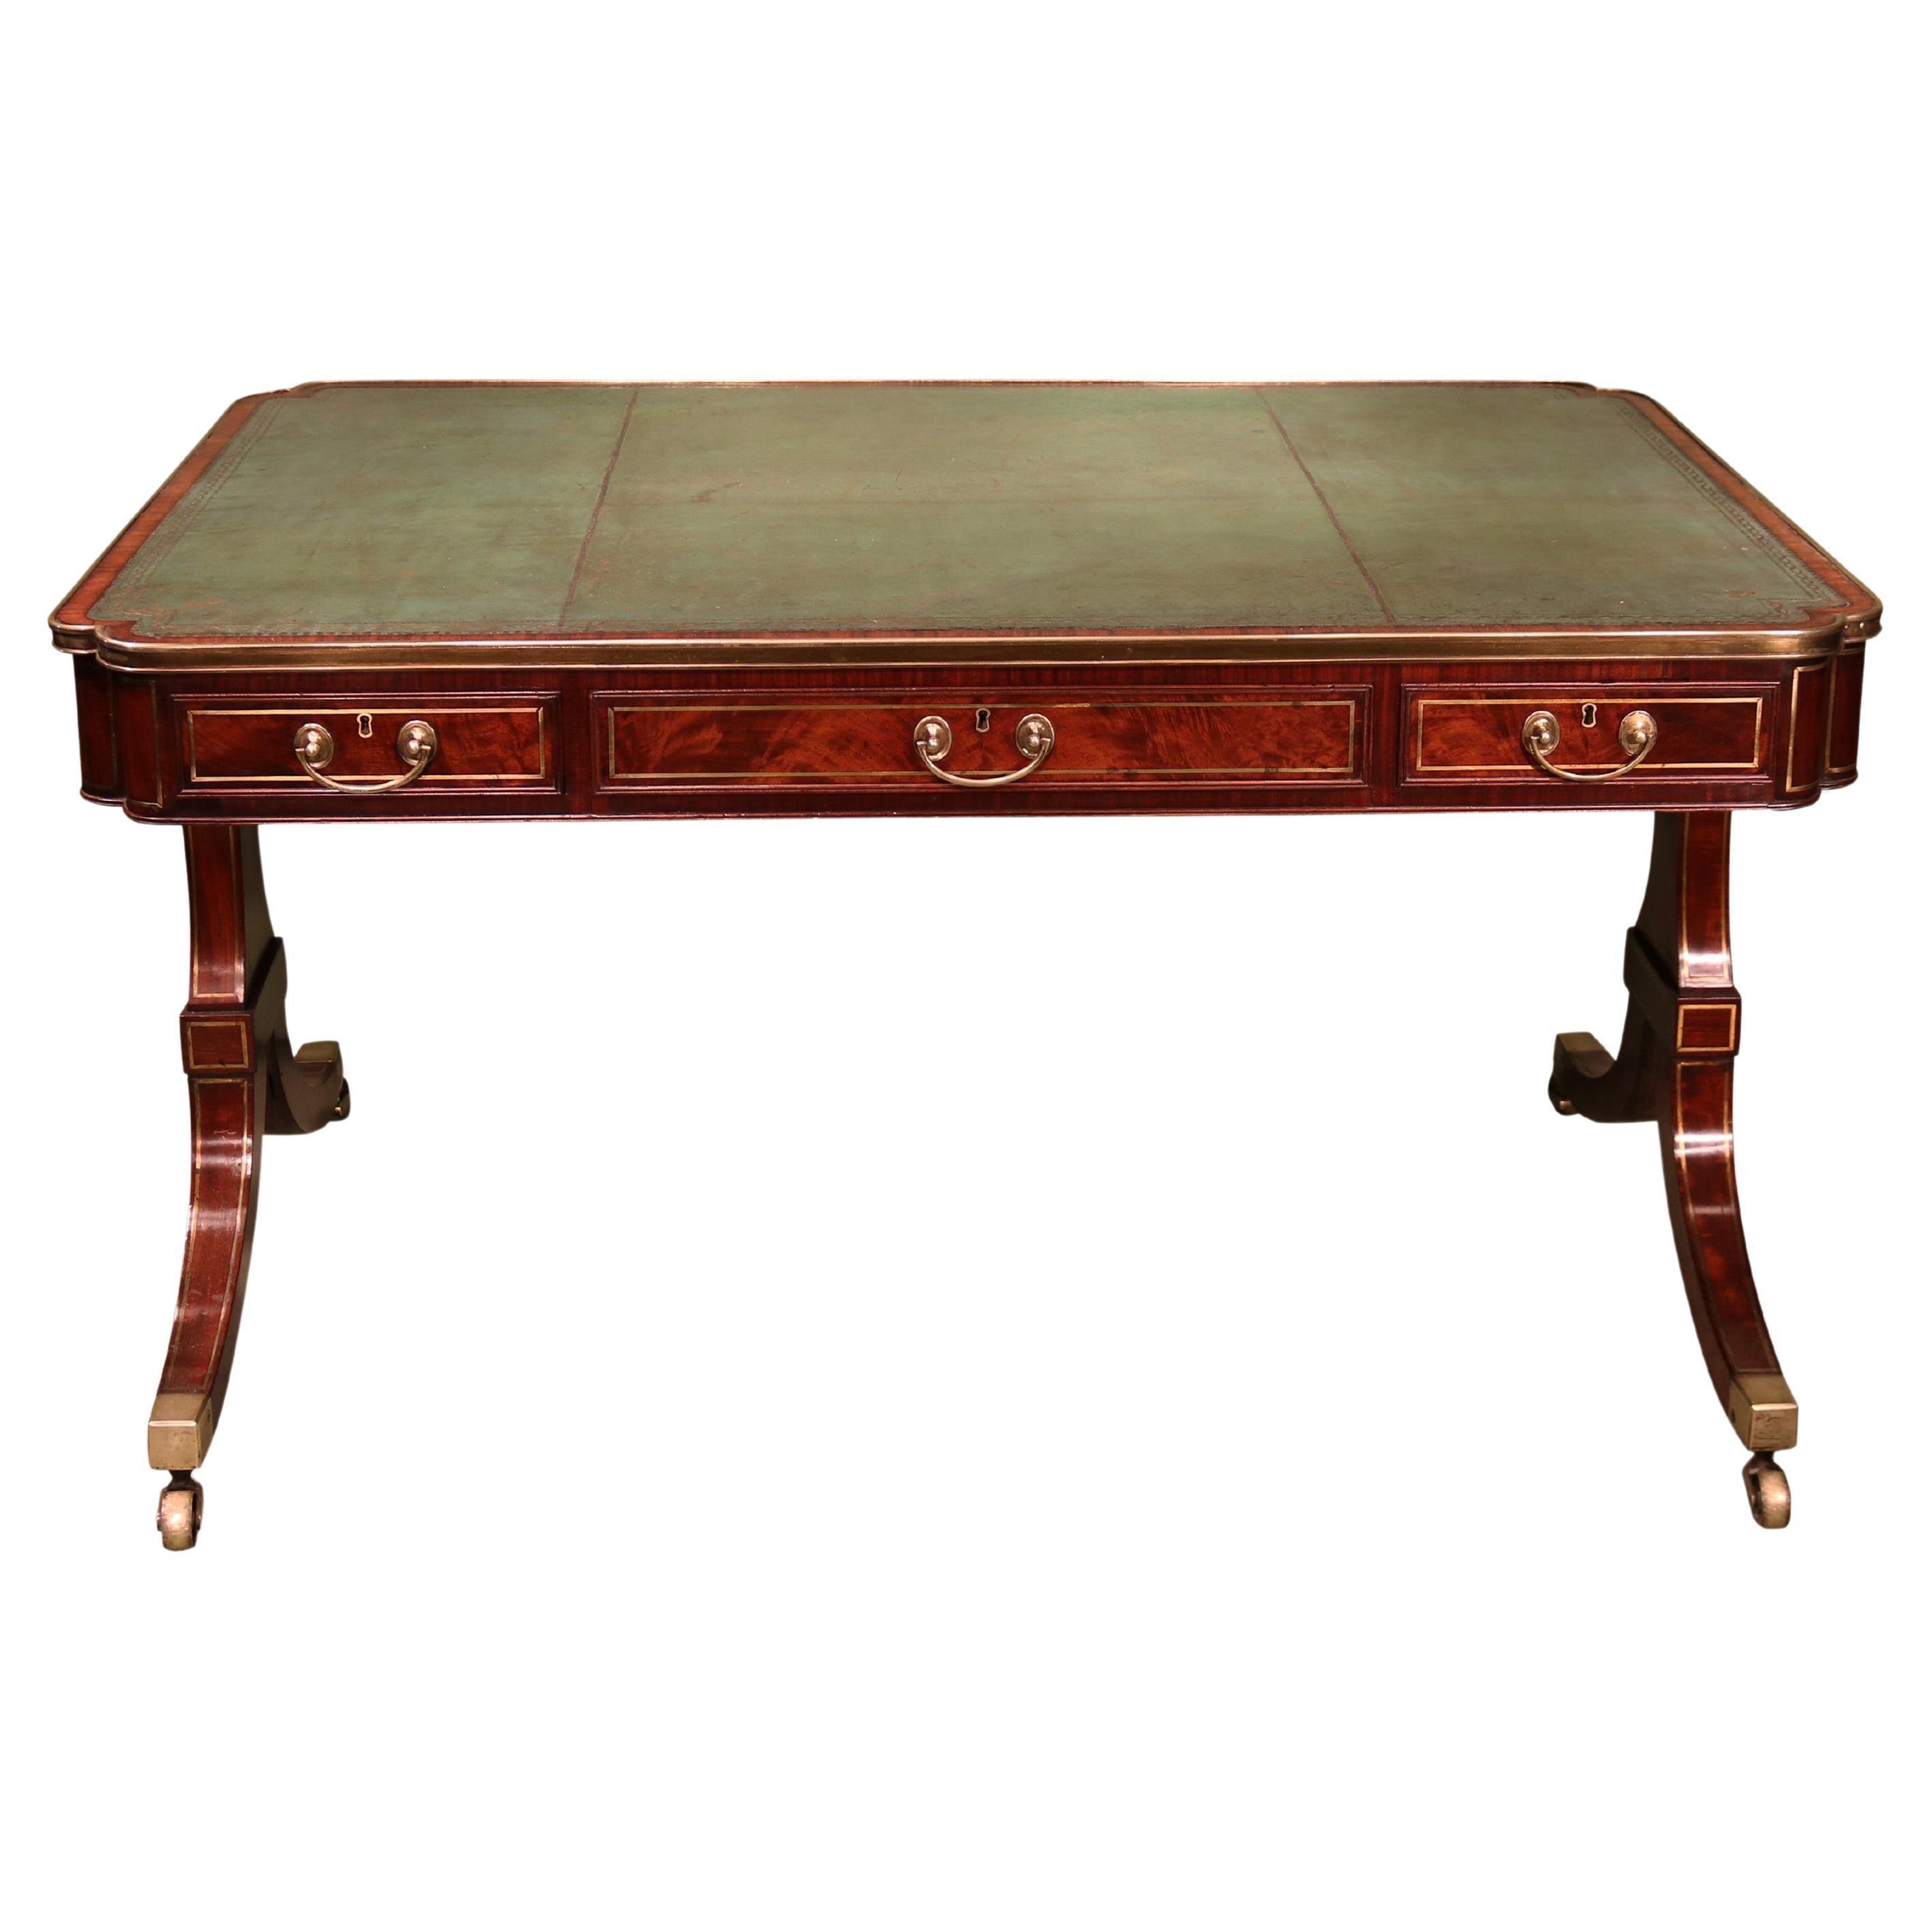 Antique Regency period mahogany end support writing table